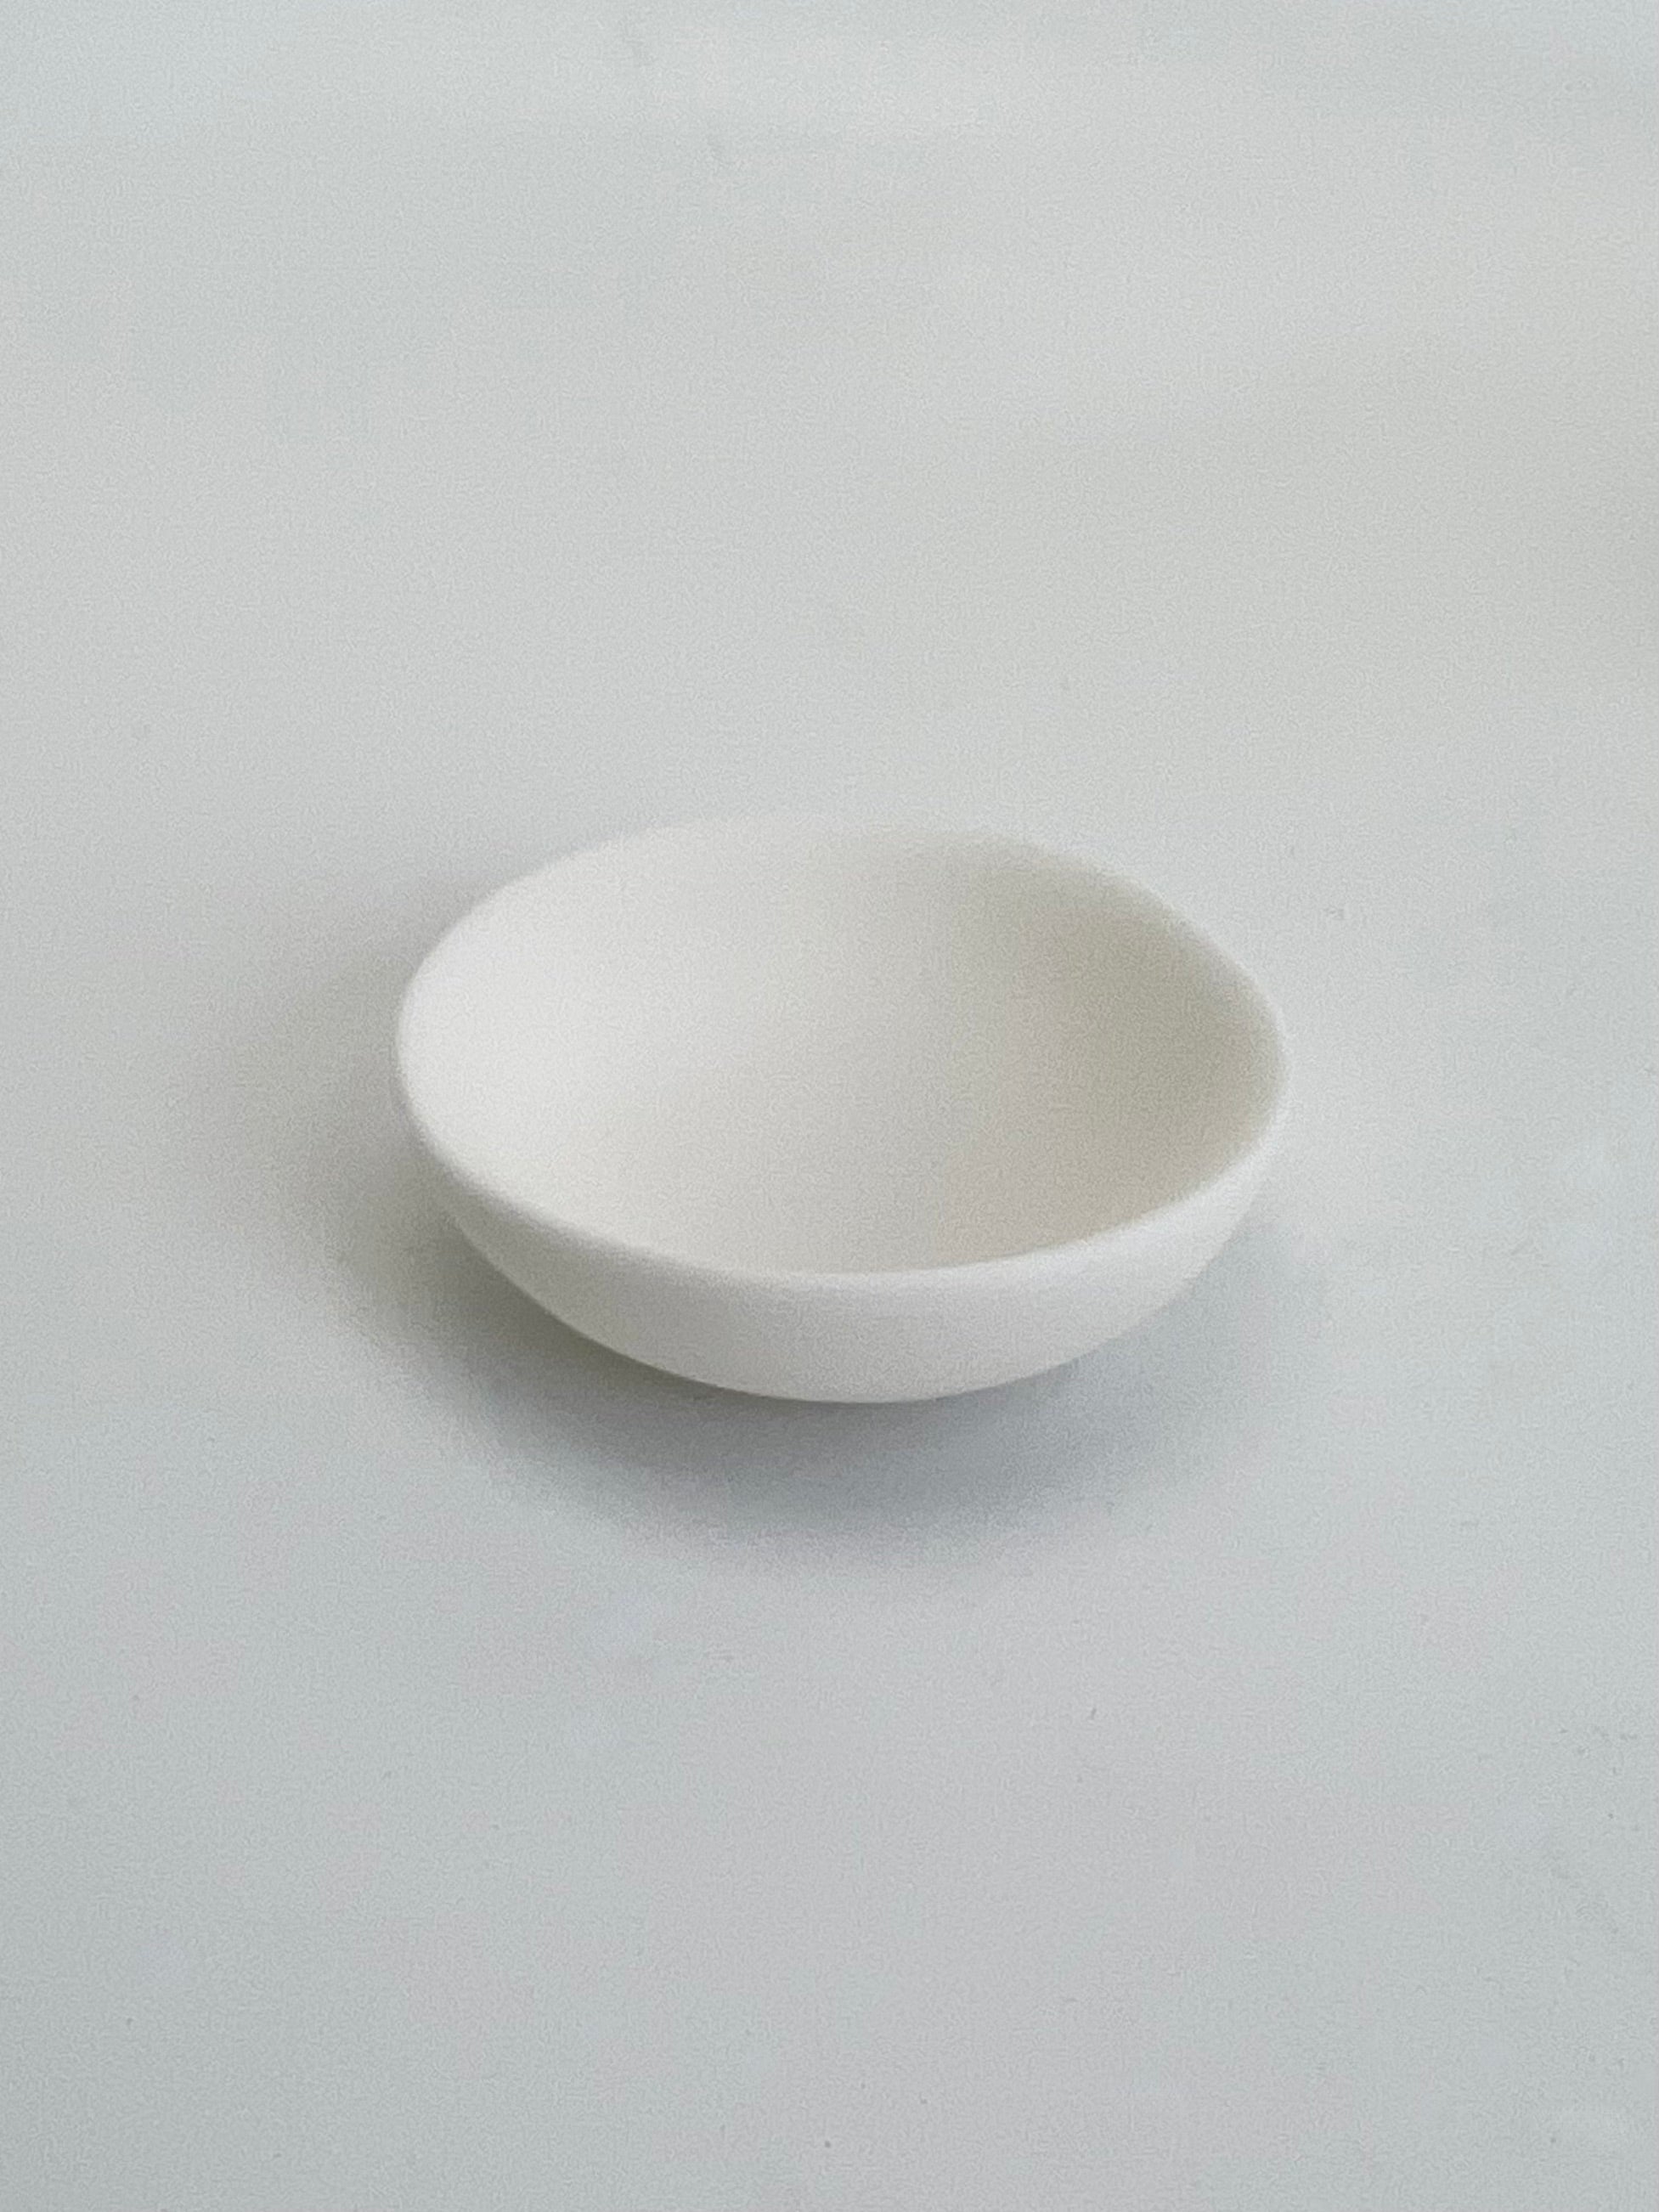 Sculpt Condiment Bowl in White by Tina Frey